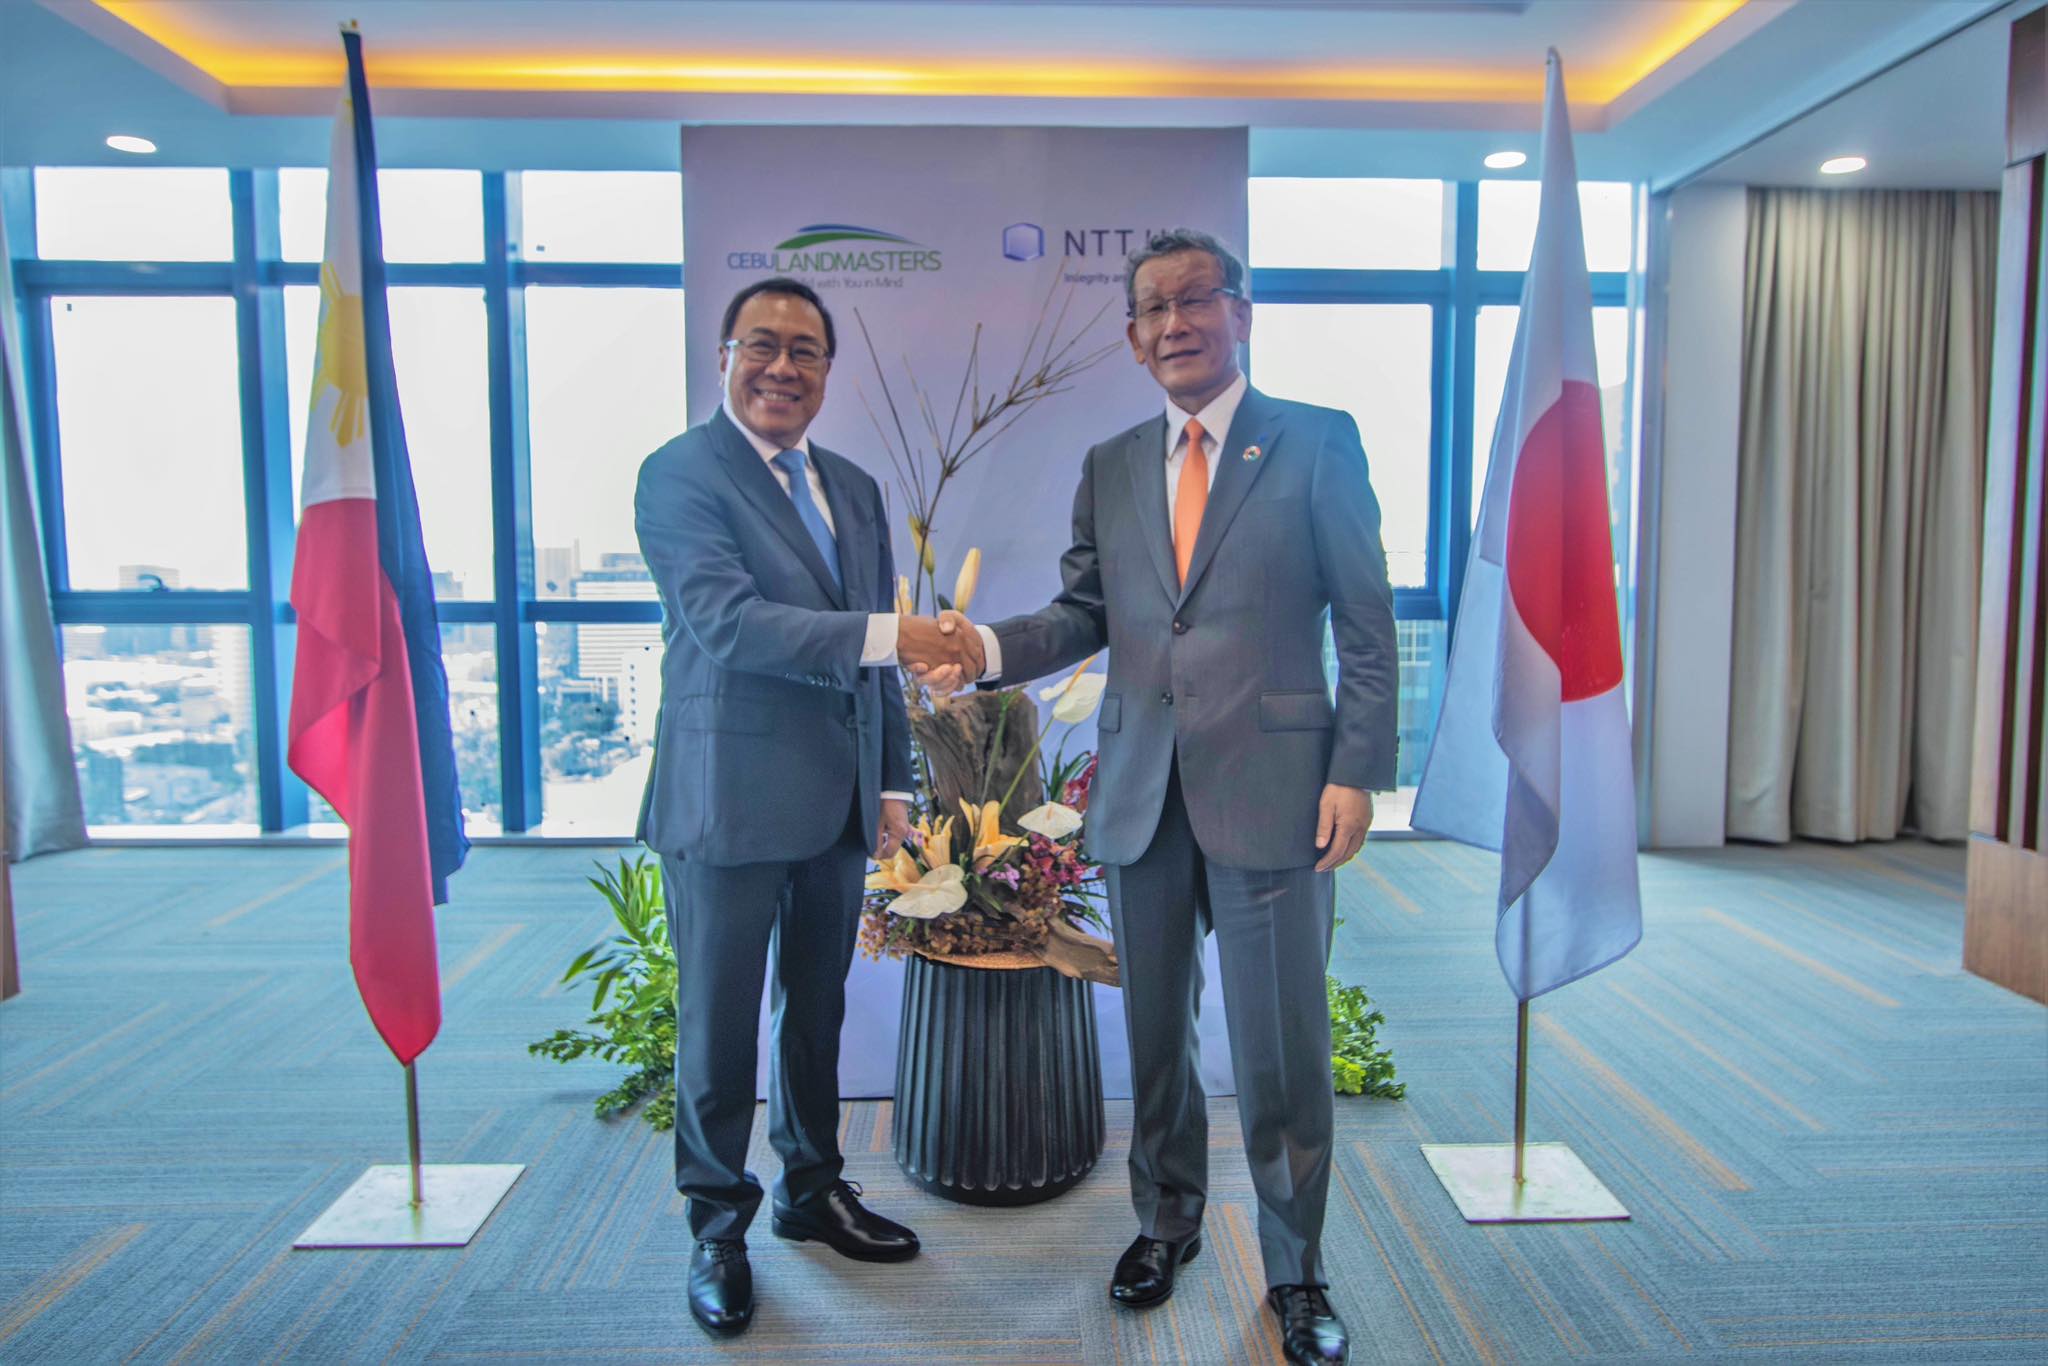 CLI announces first international joint venture, partners with leading Japanese property firm NTTUD Group